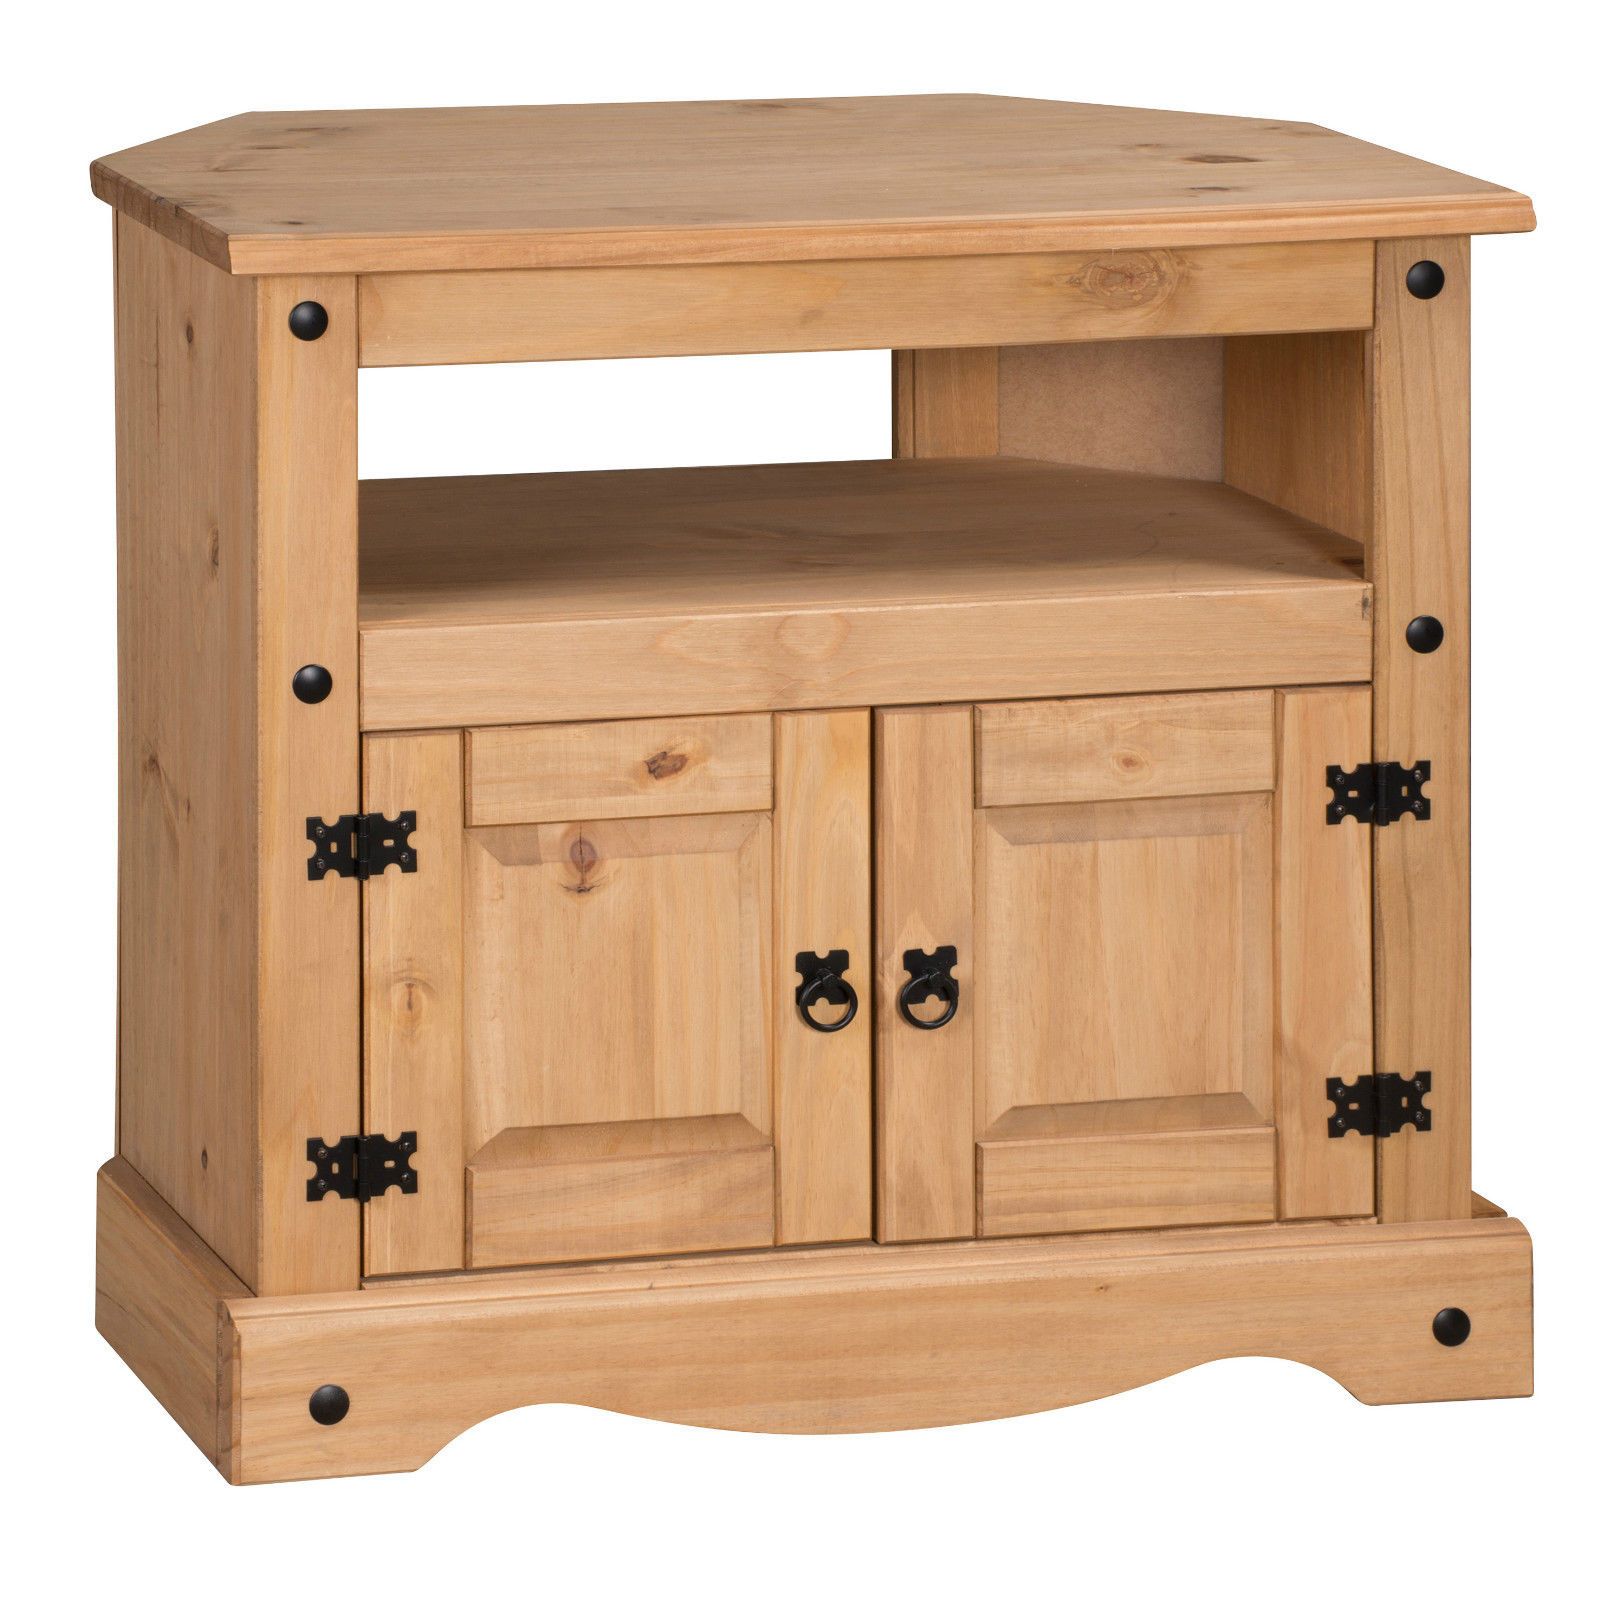 H4home Rustic Corner Tv Stand Solid Wood | H4home Furnitures Within Solid Oak Corner Tv Cabinets (View 13 of 15)